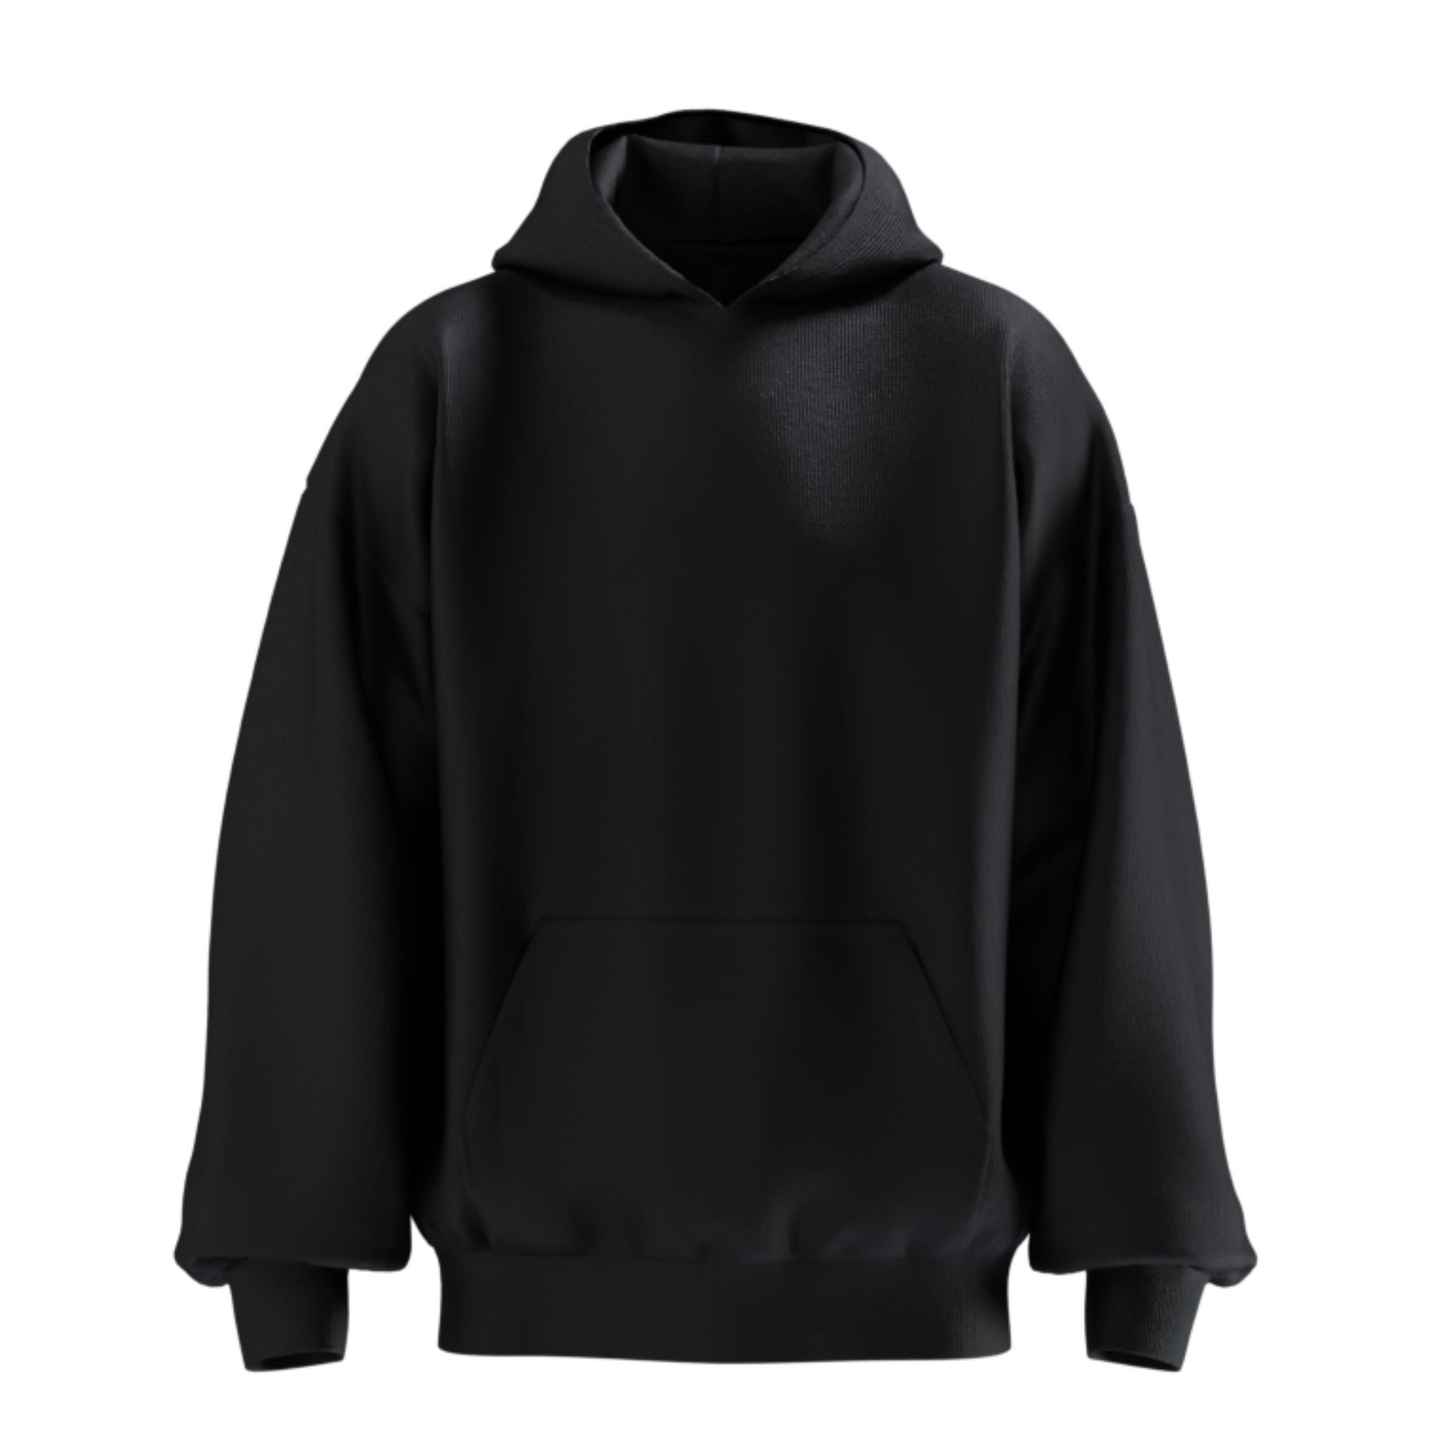 HYPExSTORE® DEA DRINK EVERY AFTERNOON OVERSIZED HOODIE 380 GSM